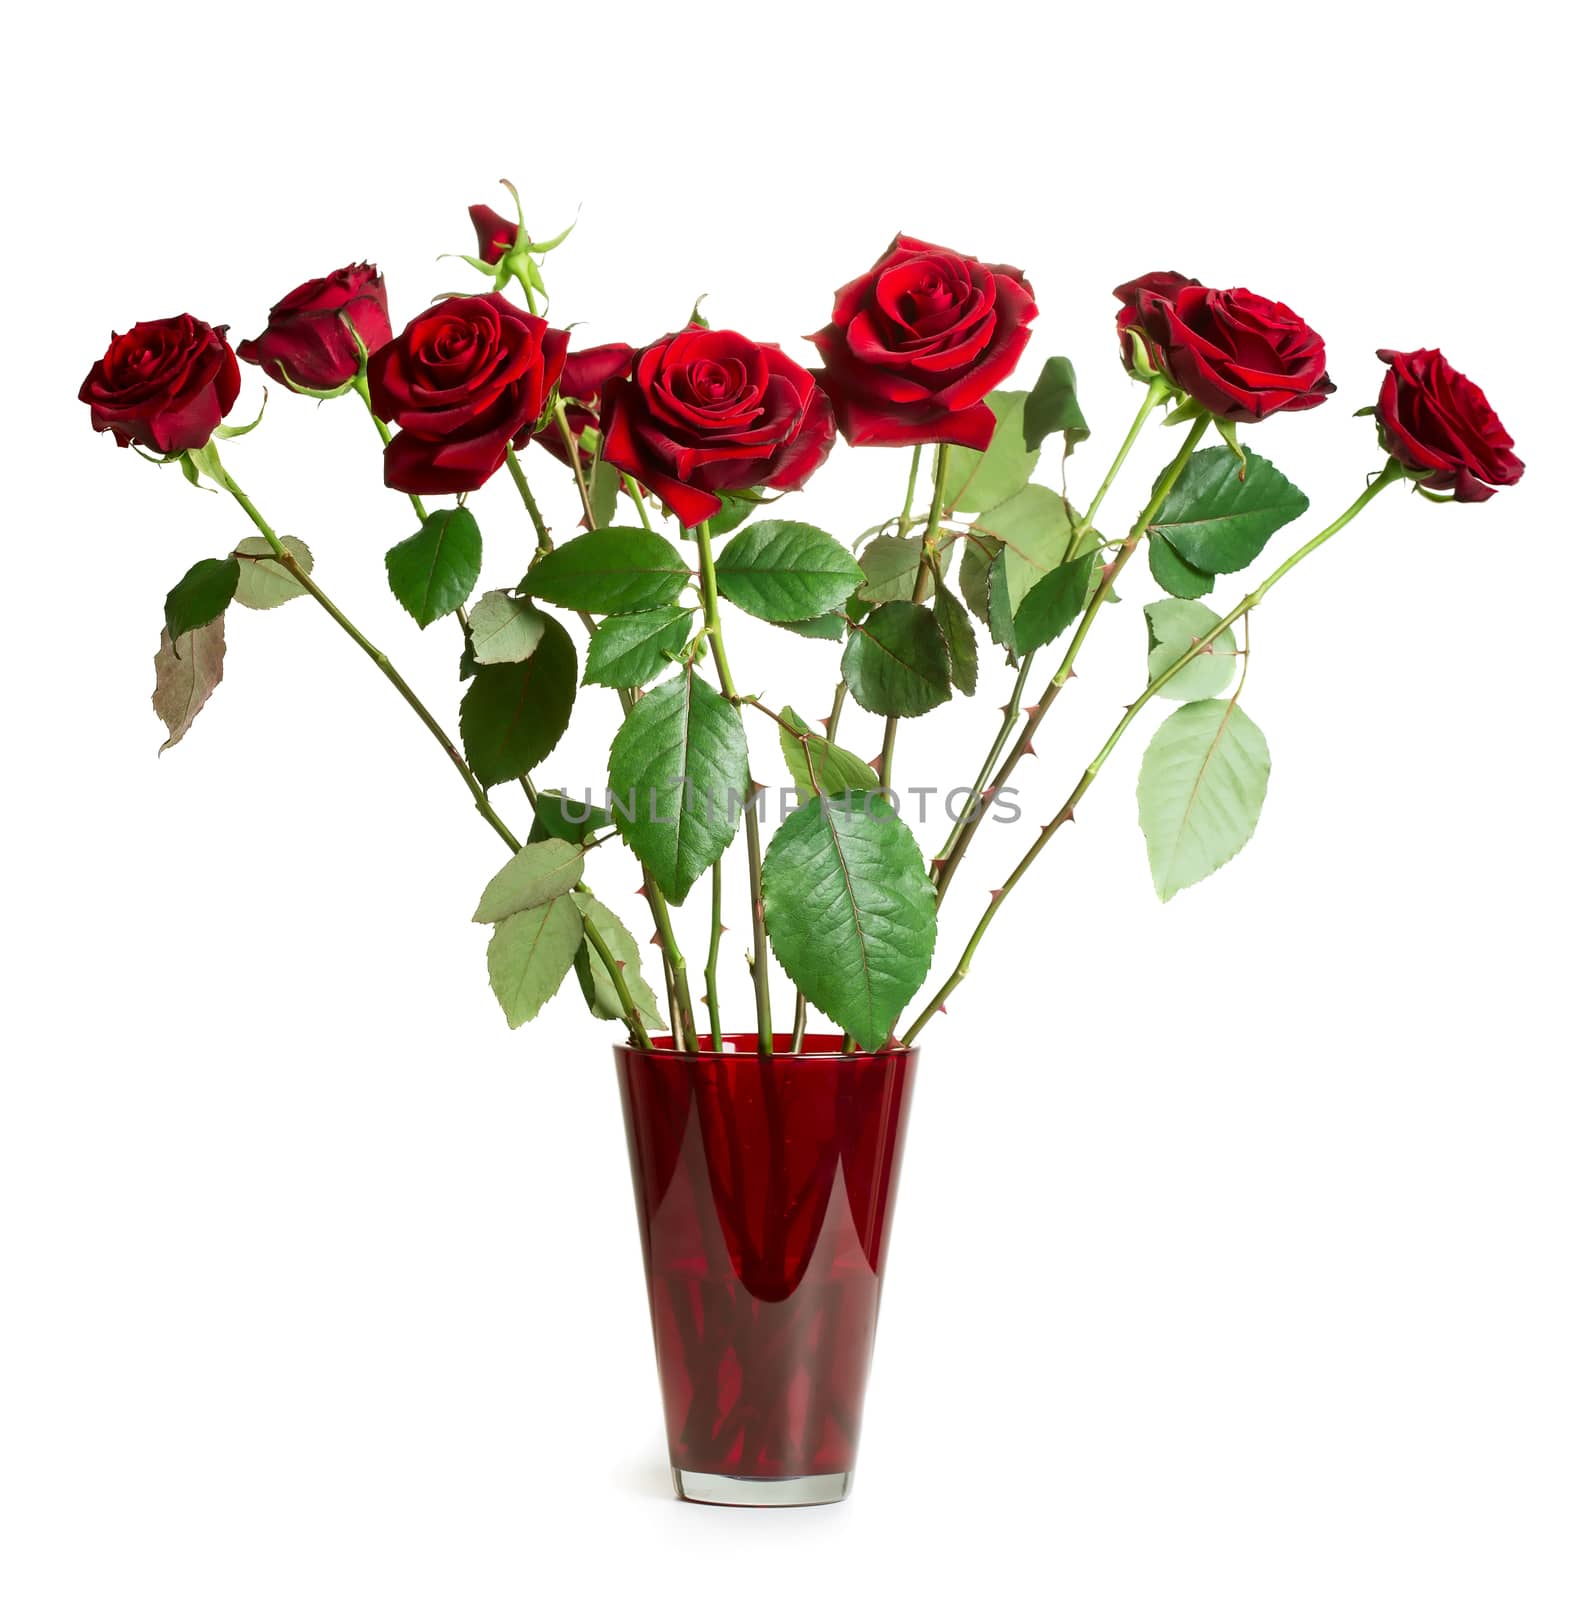 Red roses in vase isolated on white background